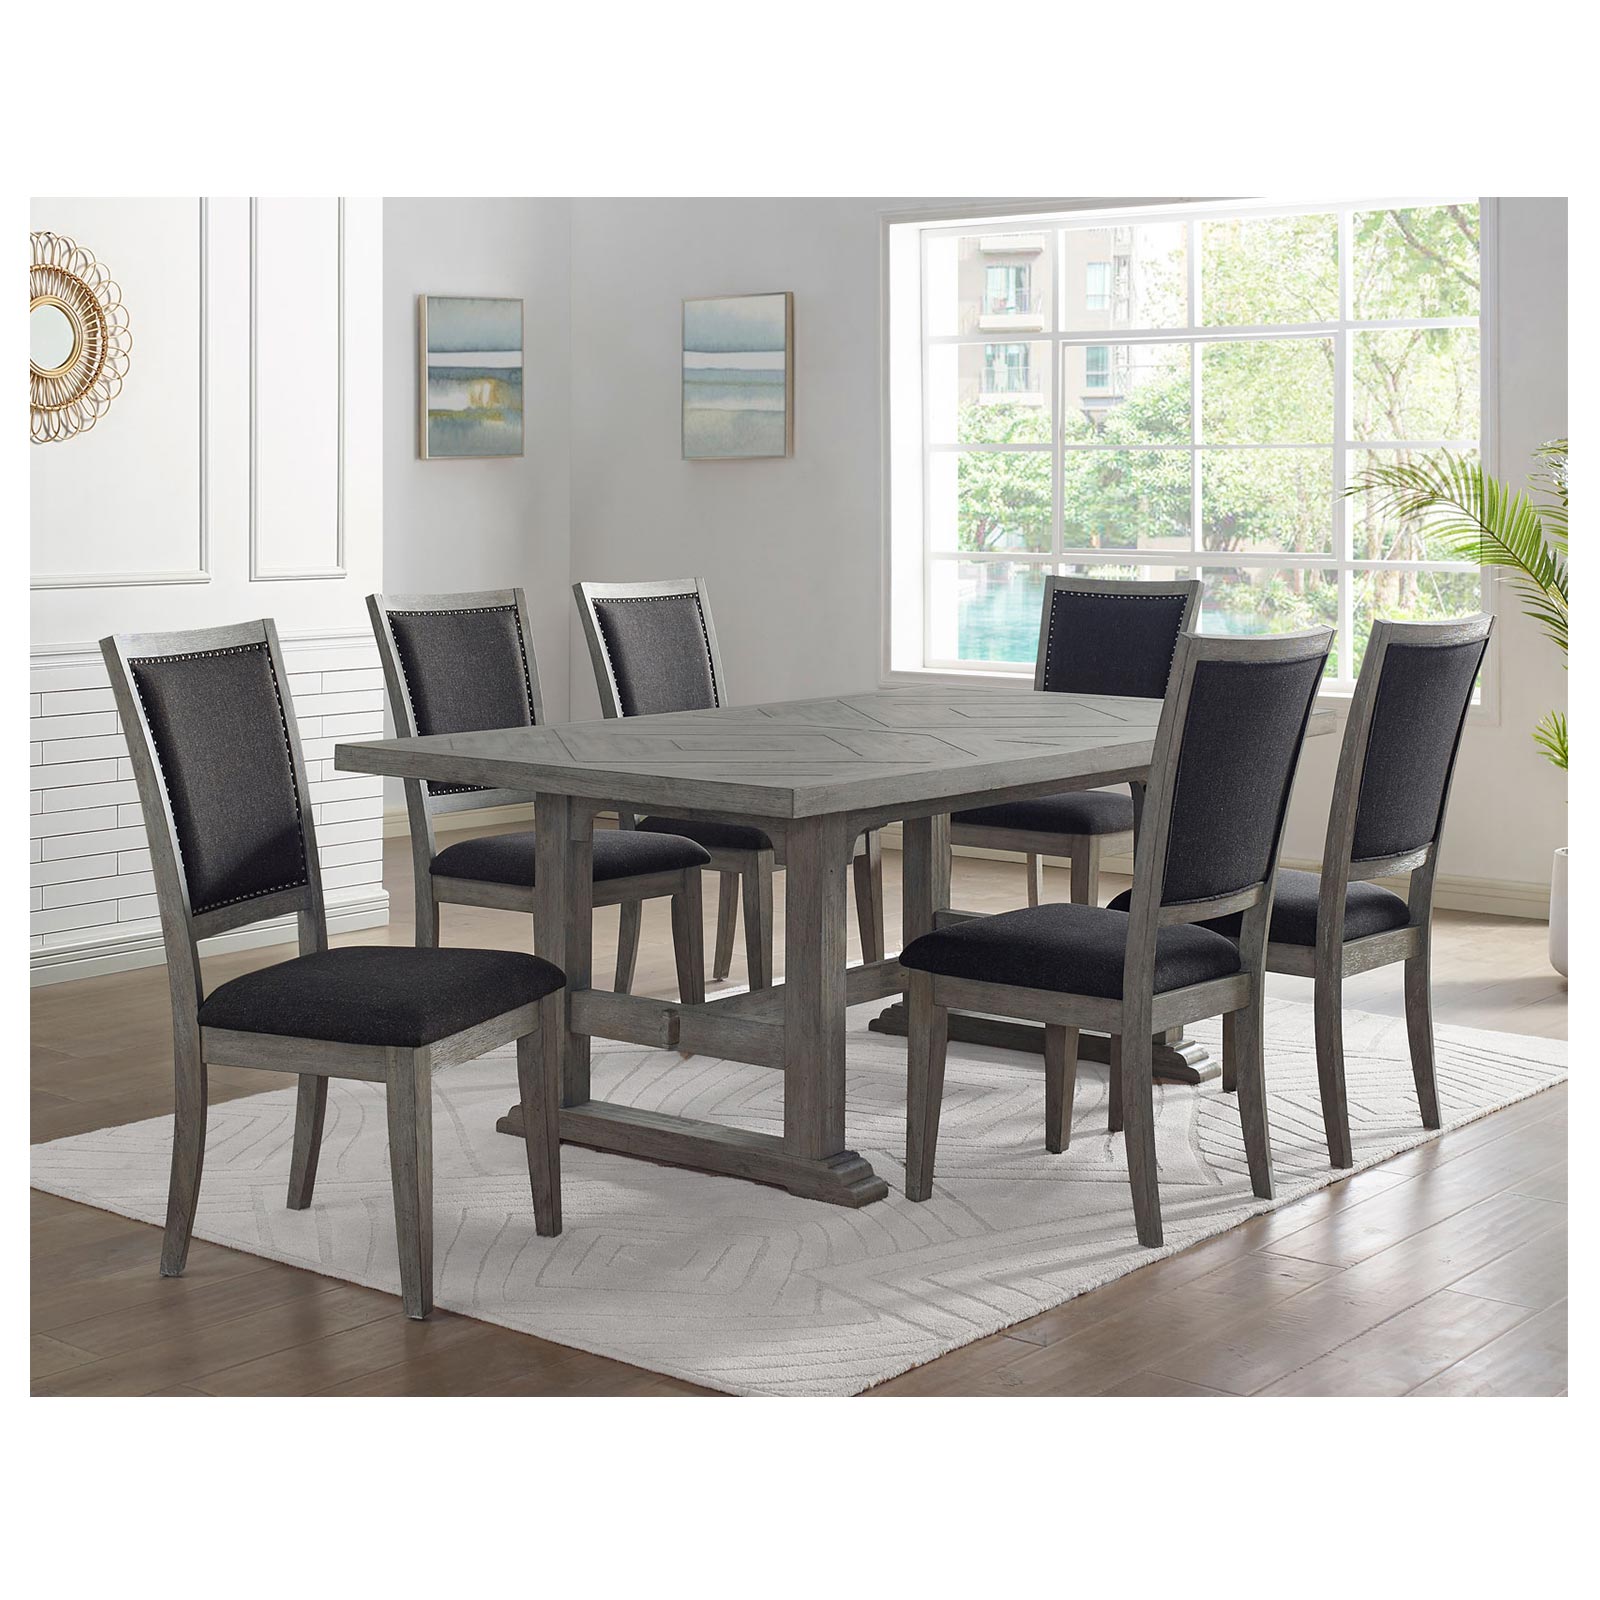 Steve Silver Co. Whitford Dining Table & 6 Side Chairs